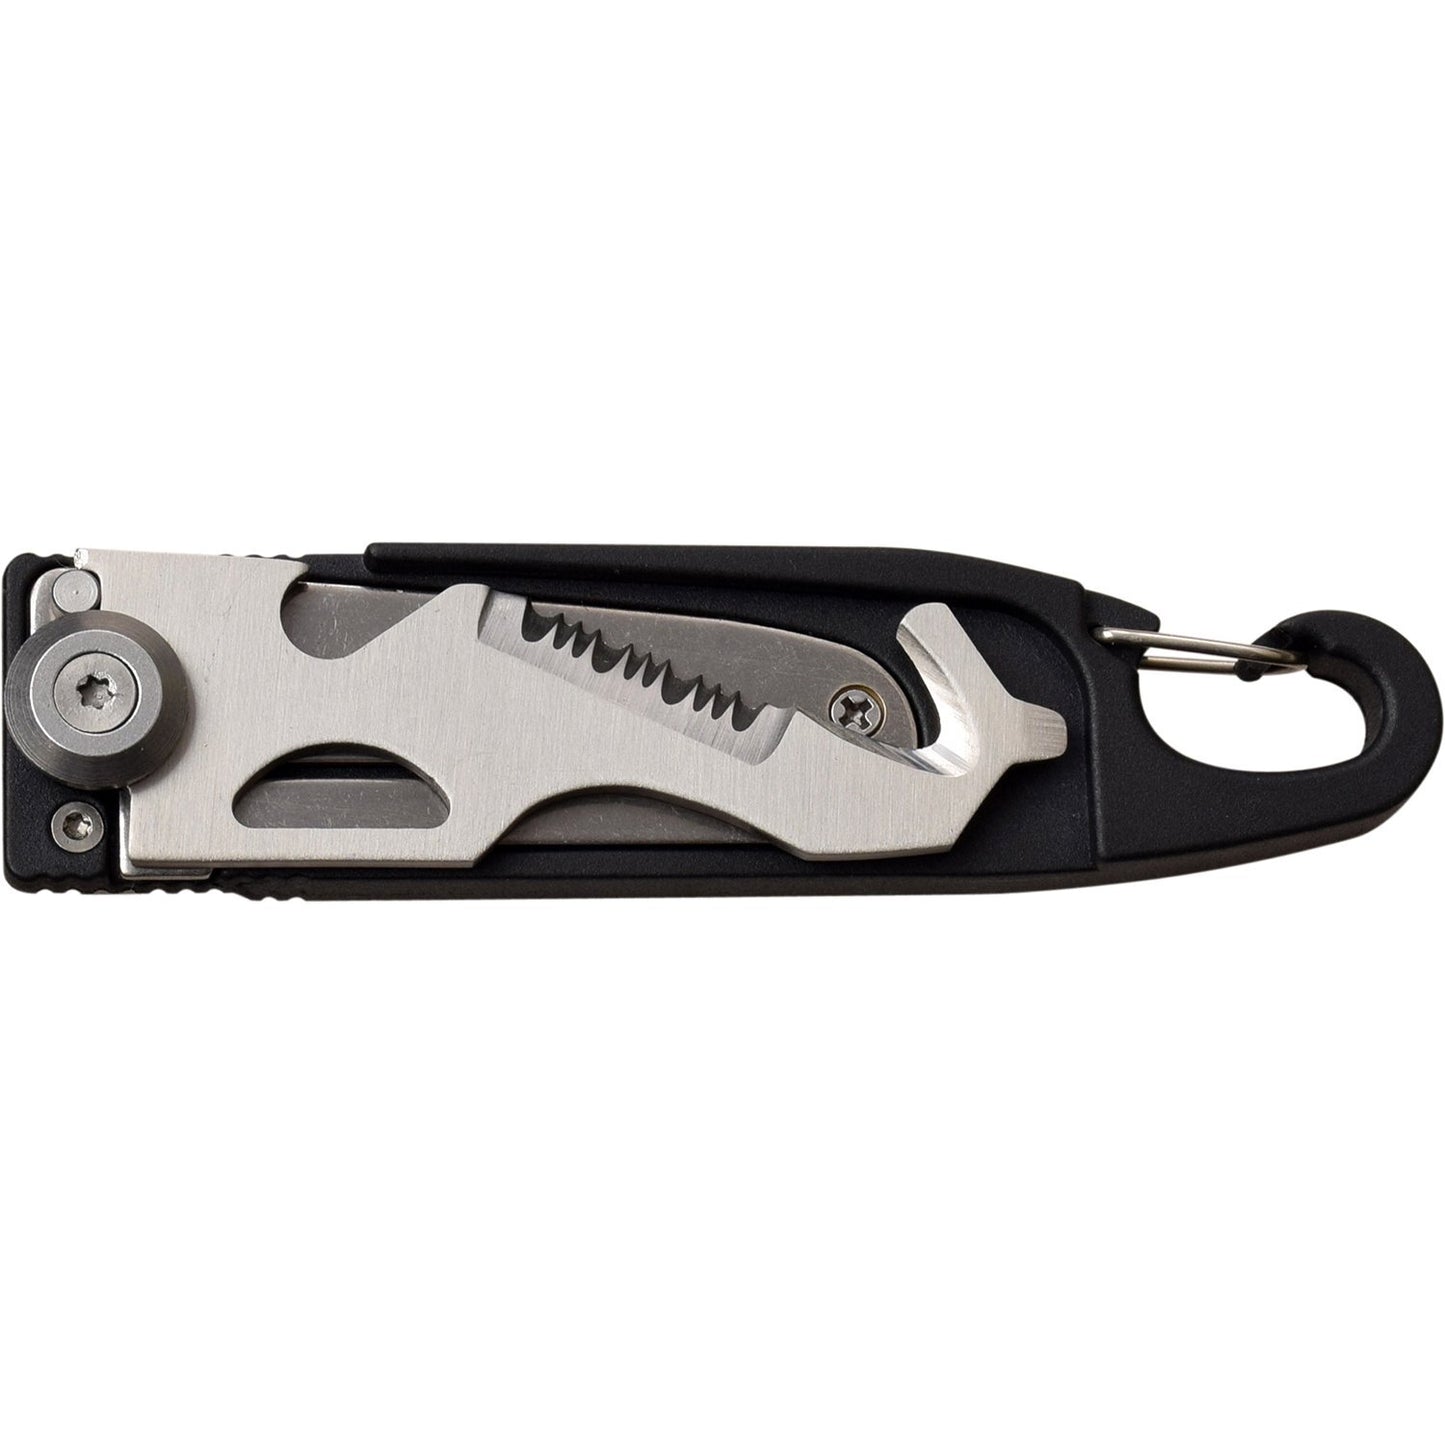 Mtech Mtech Drop Point Multi-Tools Folding Knife - 6.5 Inches Overall #mt-1102Bk Gray